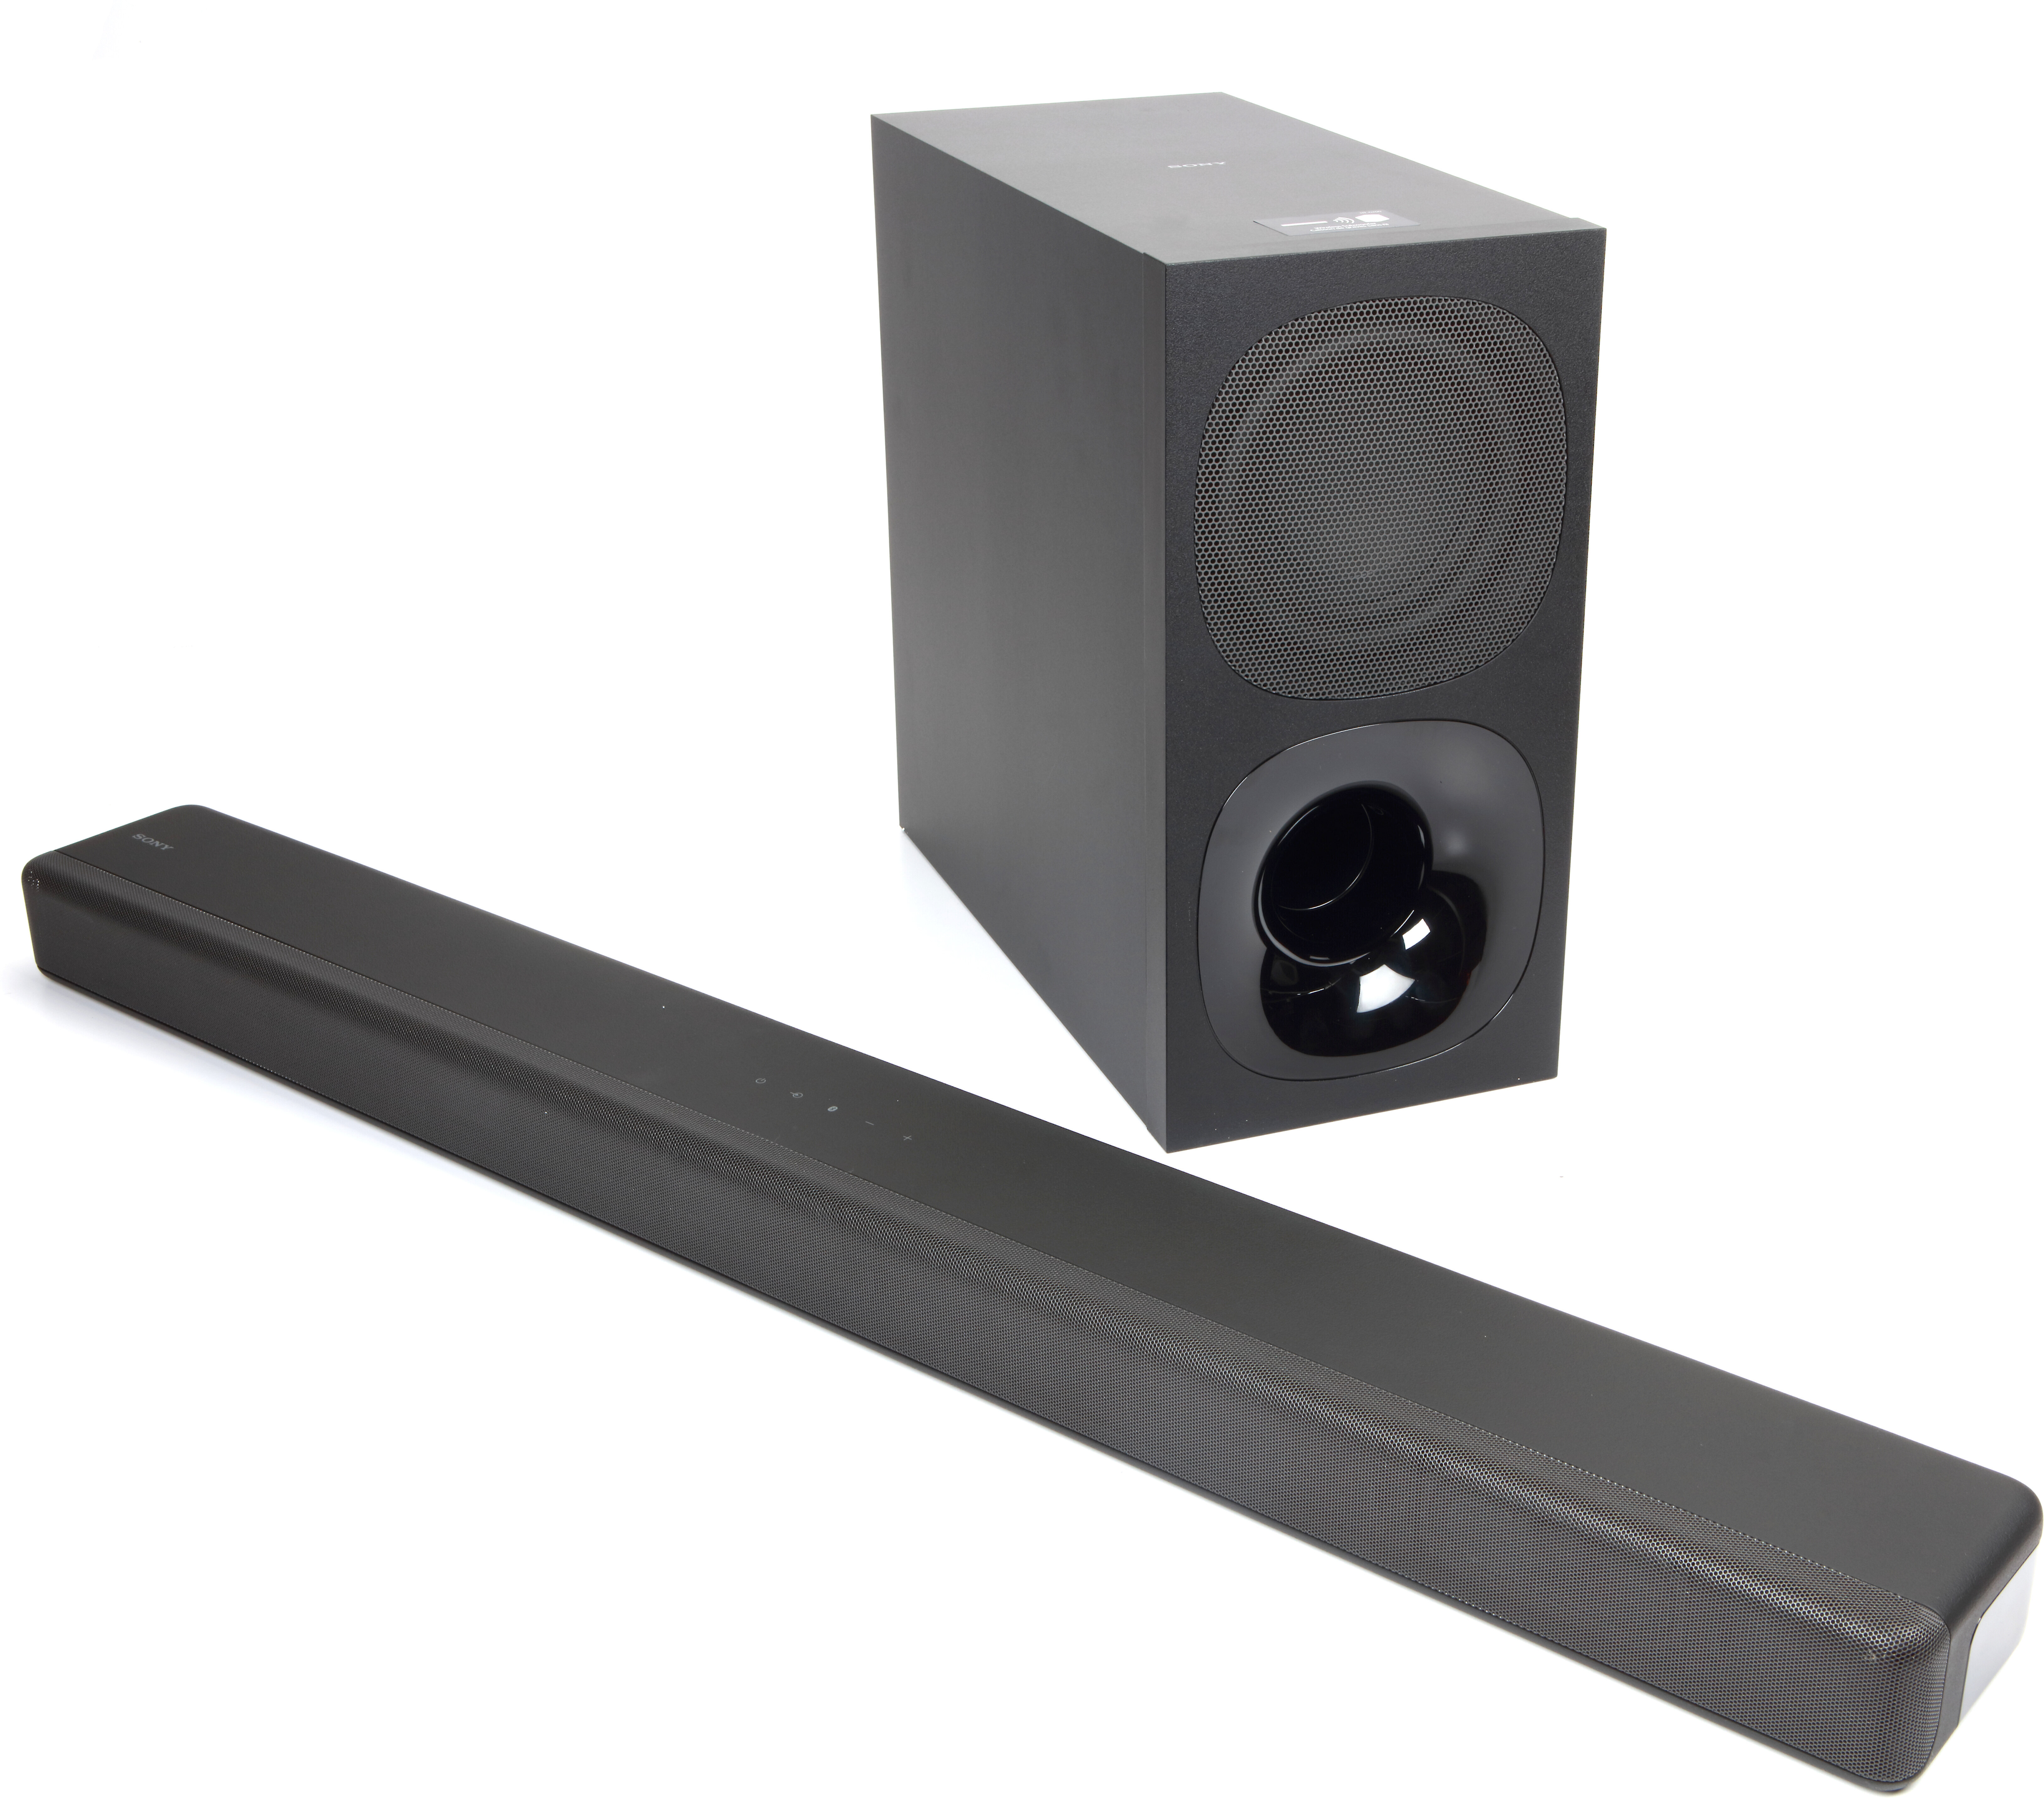 Customer Reviews: Sony HT-G700 Powered sound bar with subwoofer, Dolby Atmos®, and DTS:X at Crutchfield